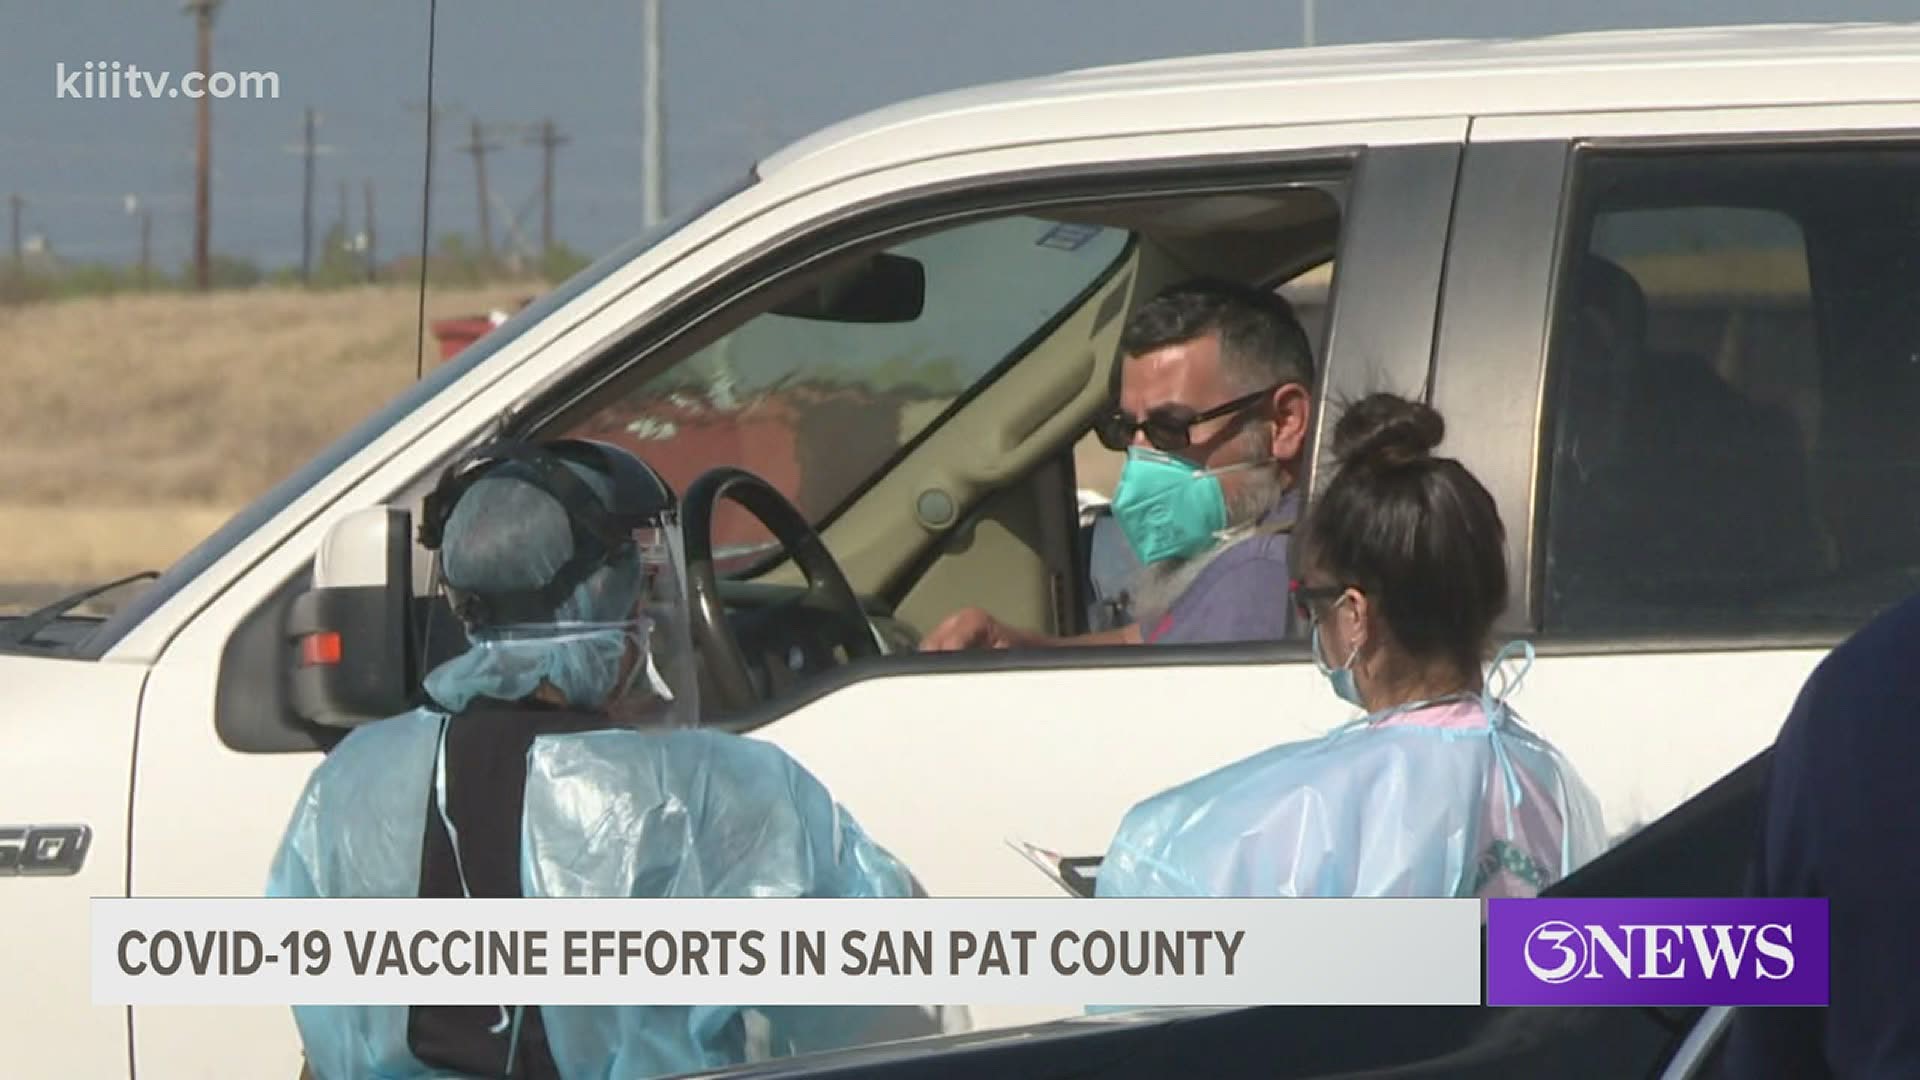 County Judge David Krebs tells 3News that as of Monday 19-percent of san pat residents had received at least 1 dose of a COVID-19 vaccine.